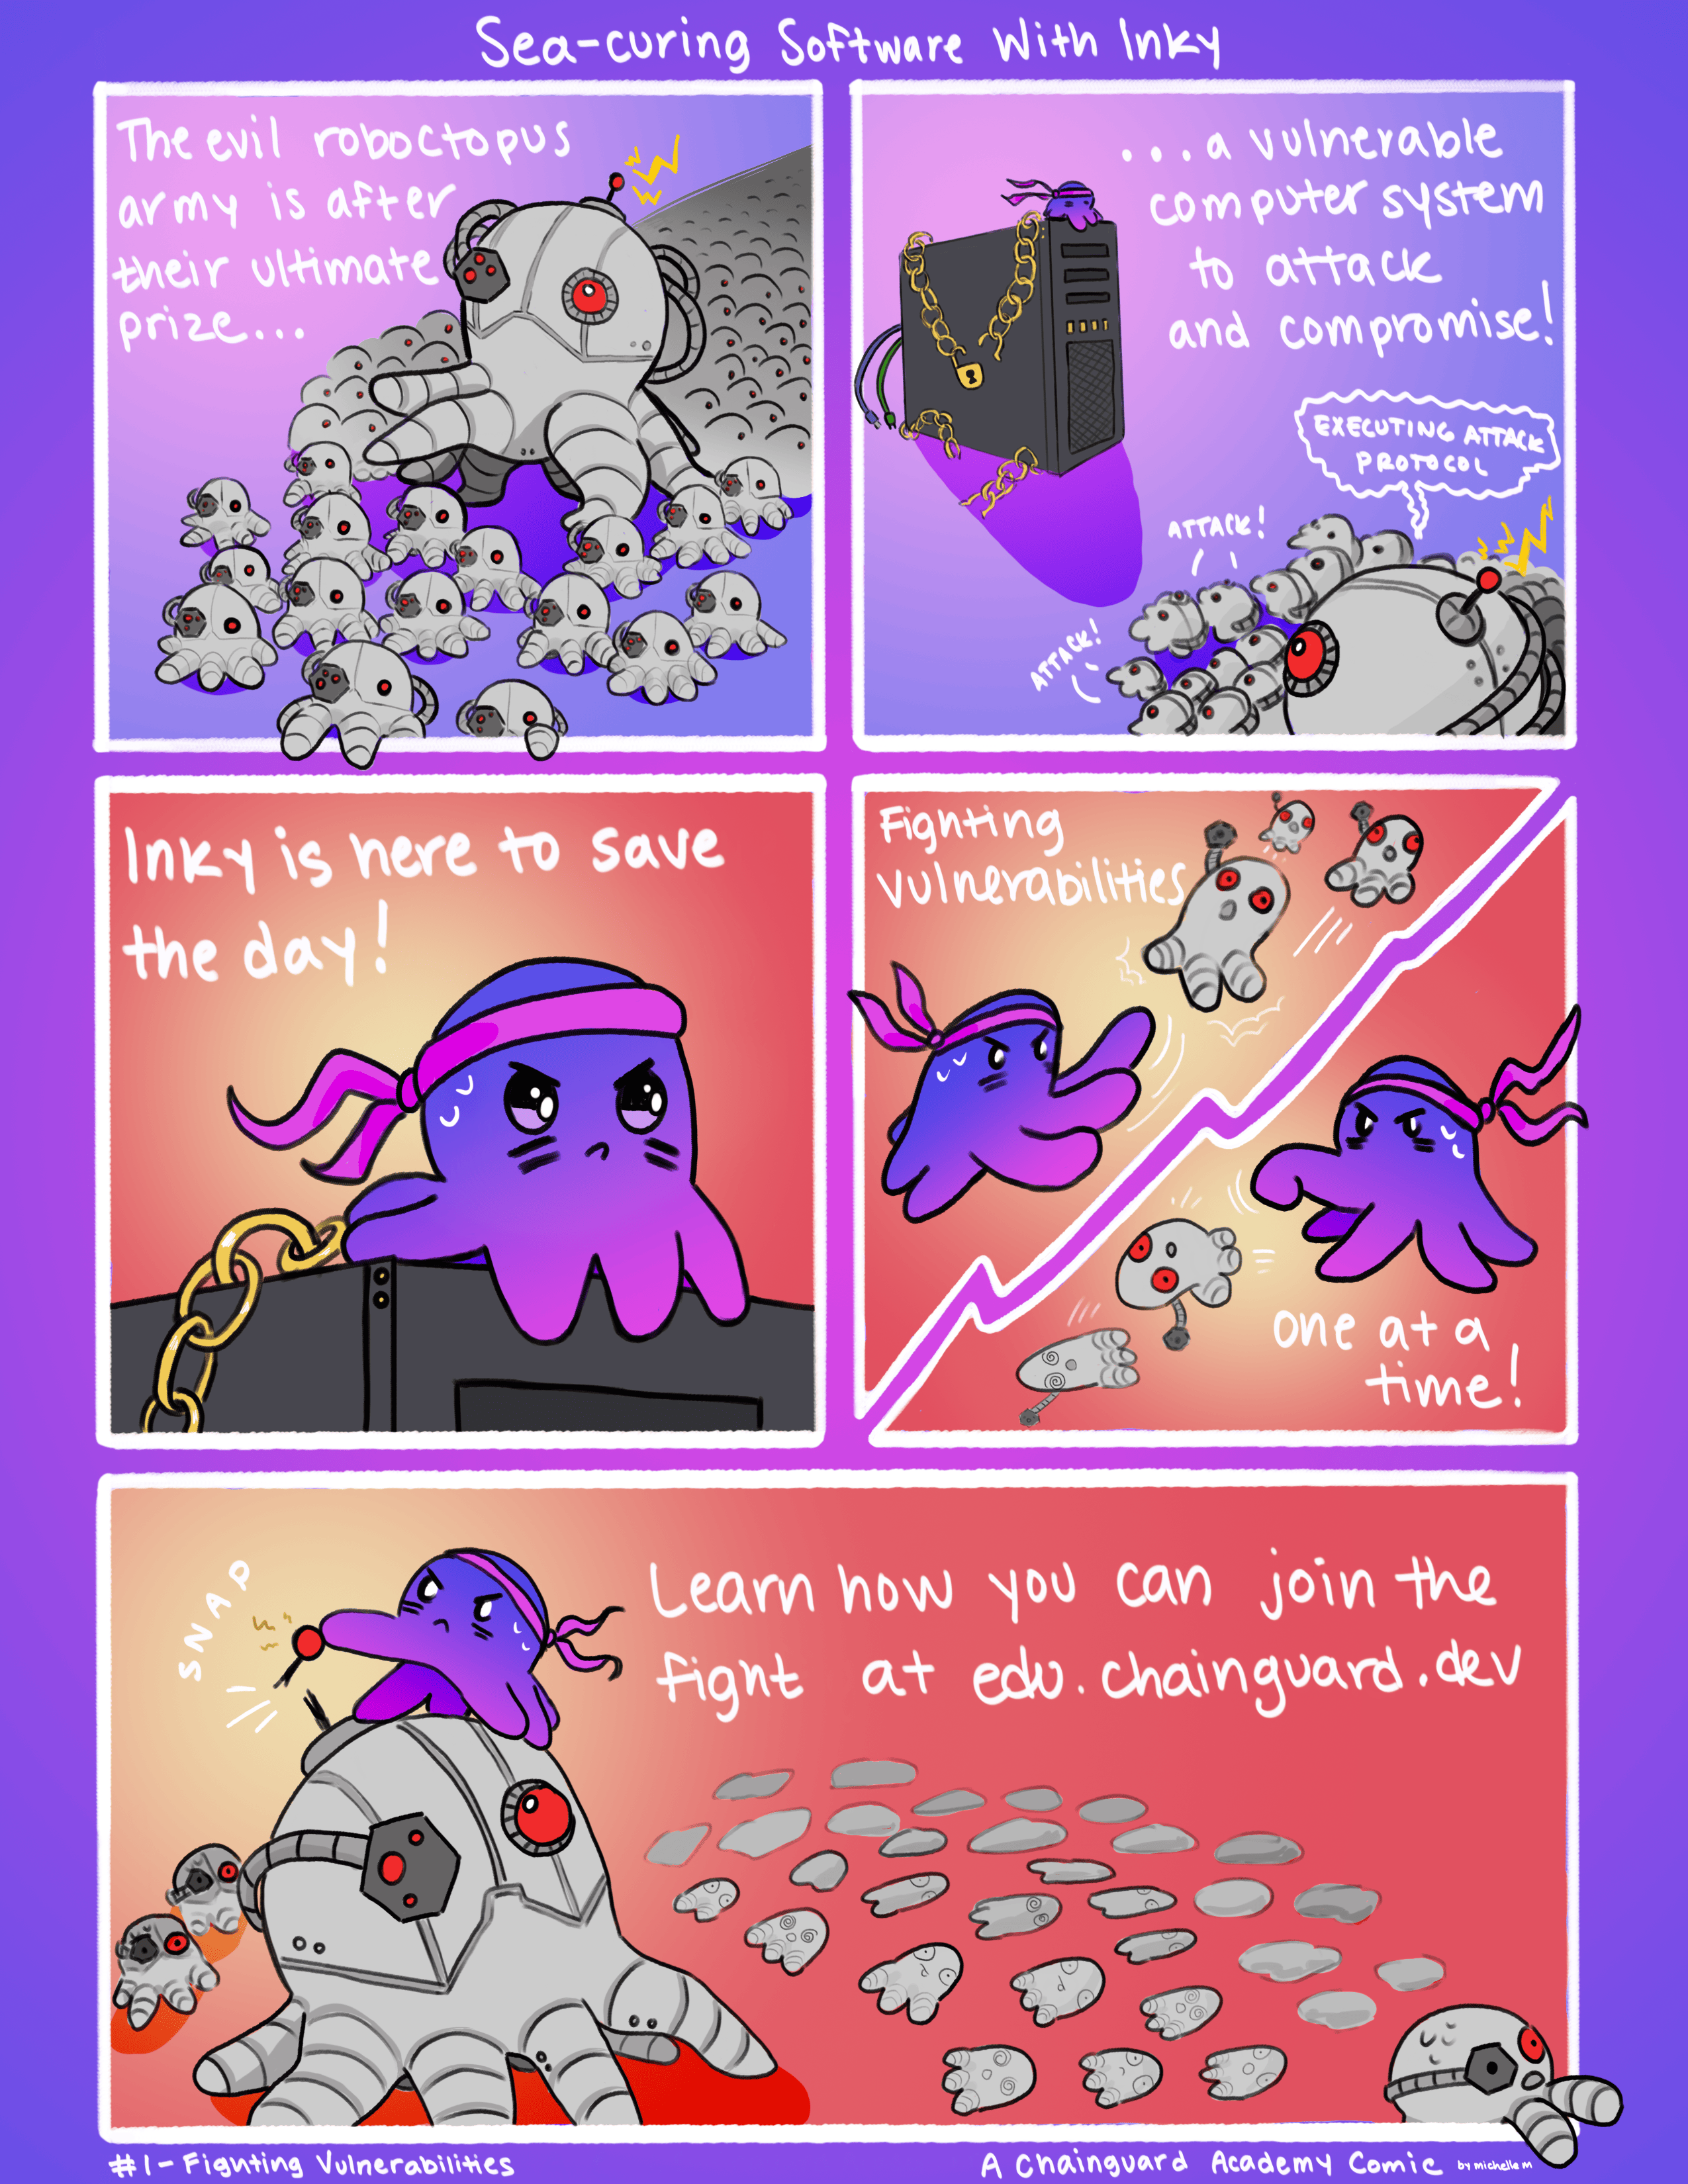 Comic featuring Chainguard's mascot, Inky the octopus, using their tentacles to defend a vulnerable computer from software vulnerabilities. The vulnerabilities take the form of robotic octopuses charging forward as an army toward the computer.